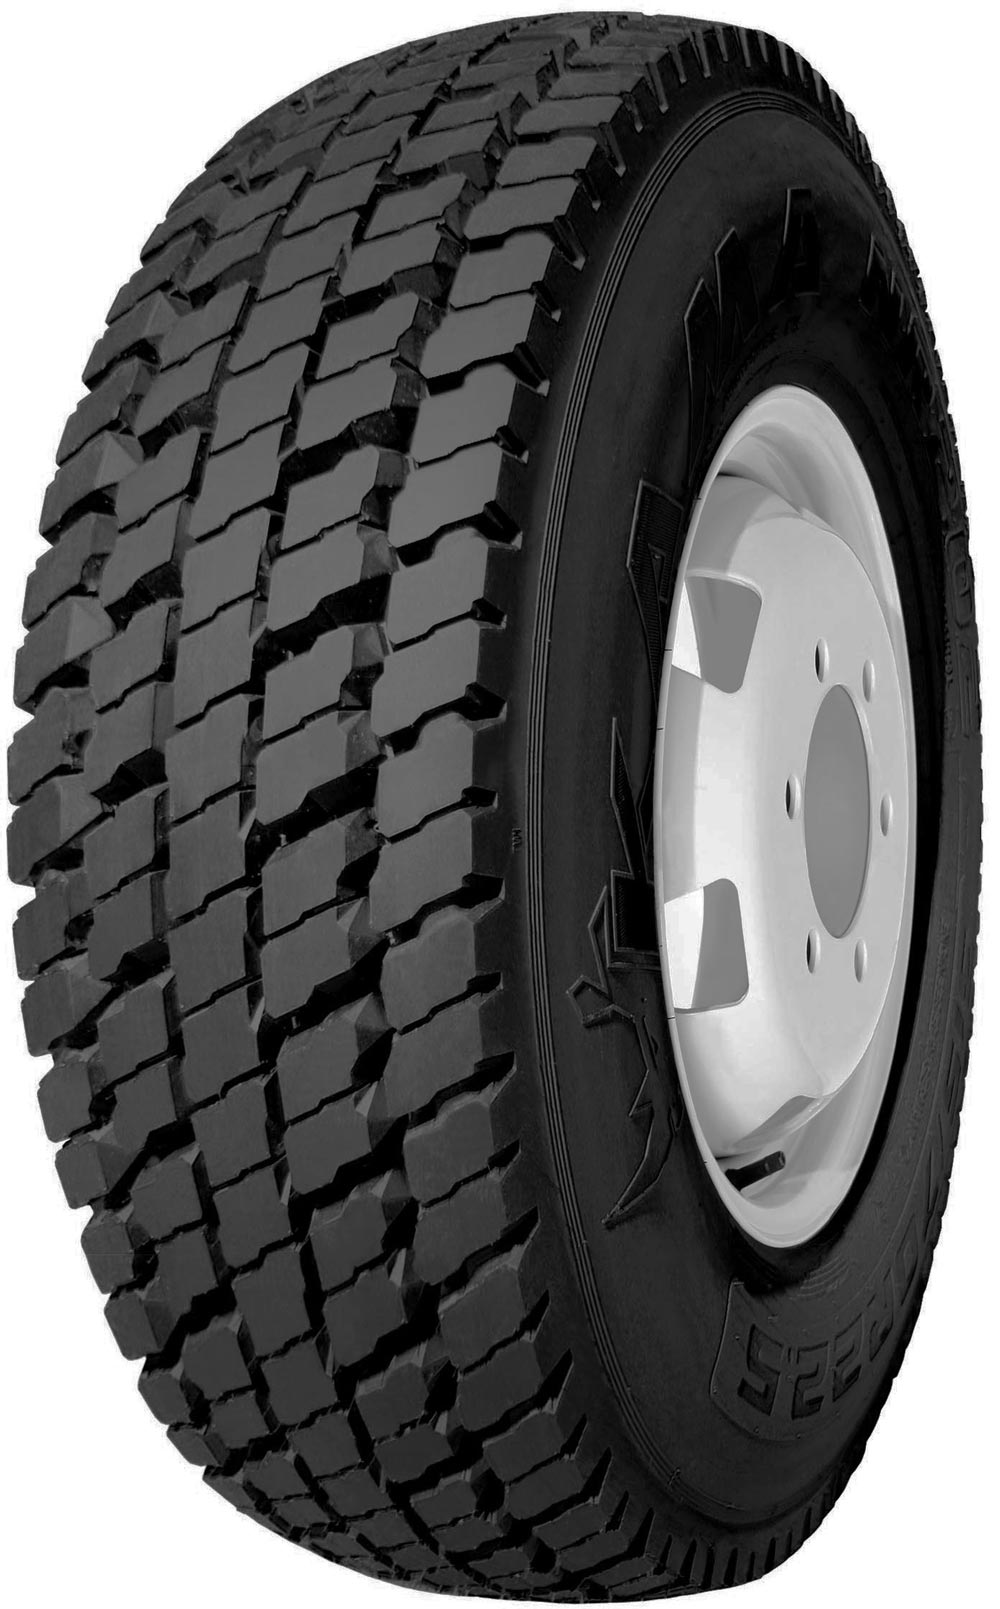 product_type-heavy_tires KAMA NR202 295/80 R22.5 152M